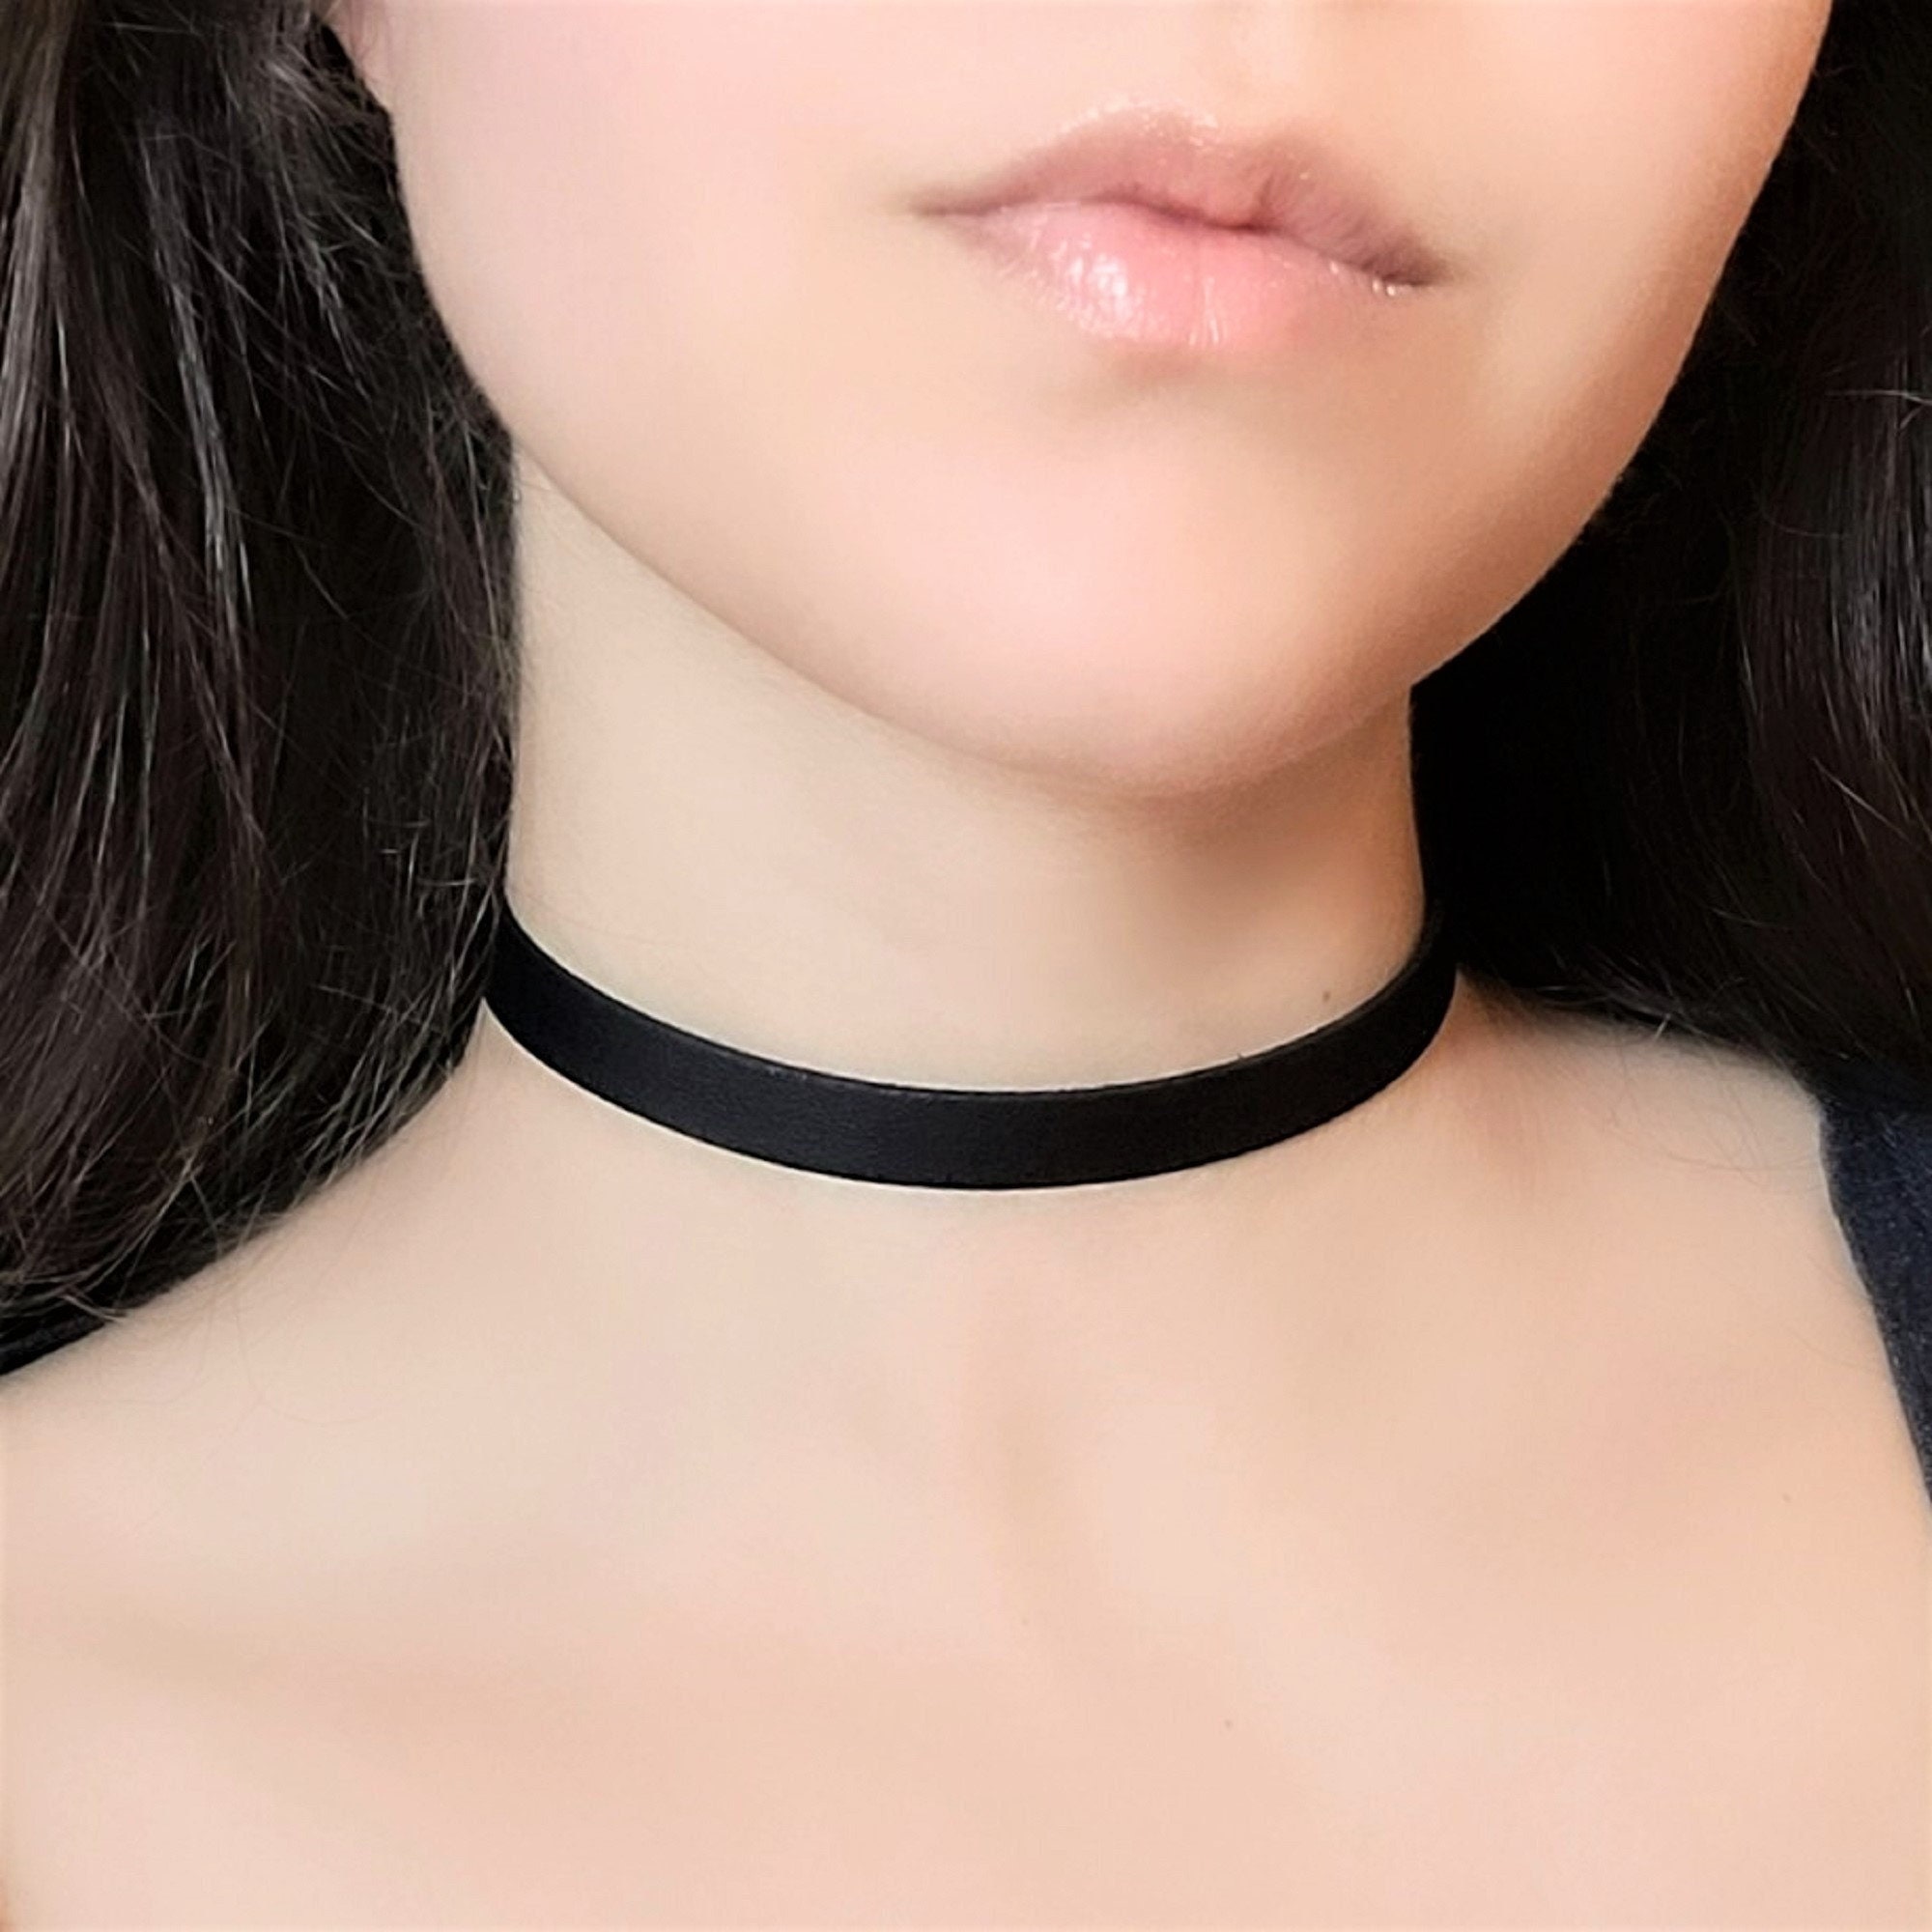 Black Choker - Reversible Faux Leather & Suede or Velvet - 20mm Thick - Customizable